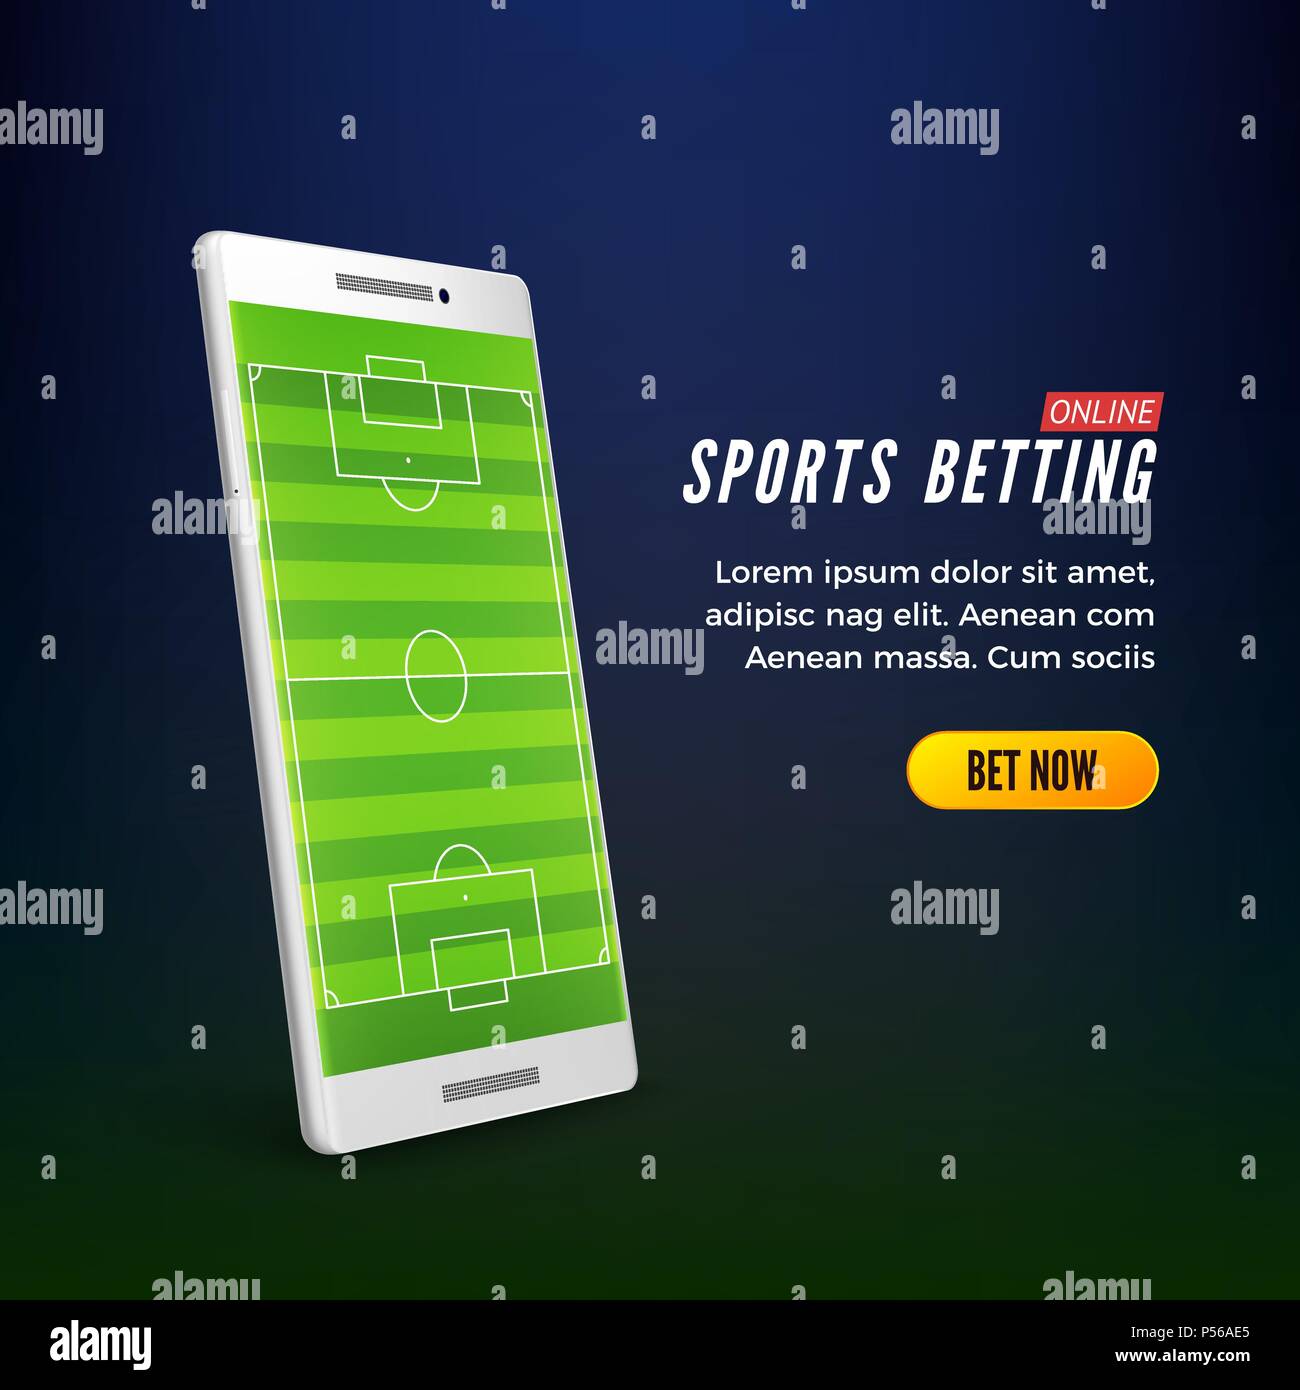 Sports betting online web banner template. smartphone with football field on screen. Vector illustration Stock Vector